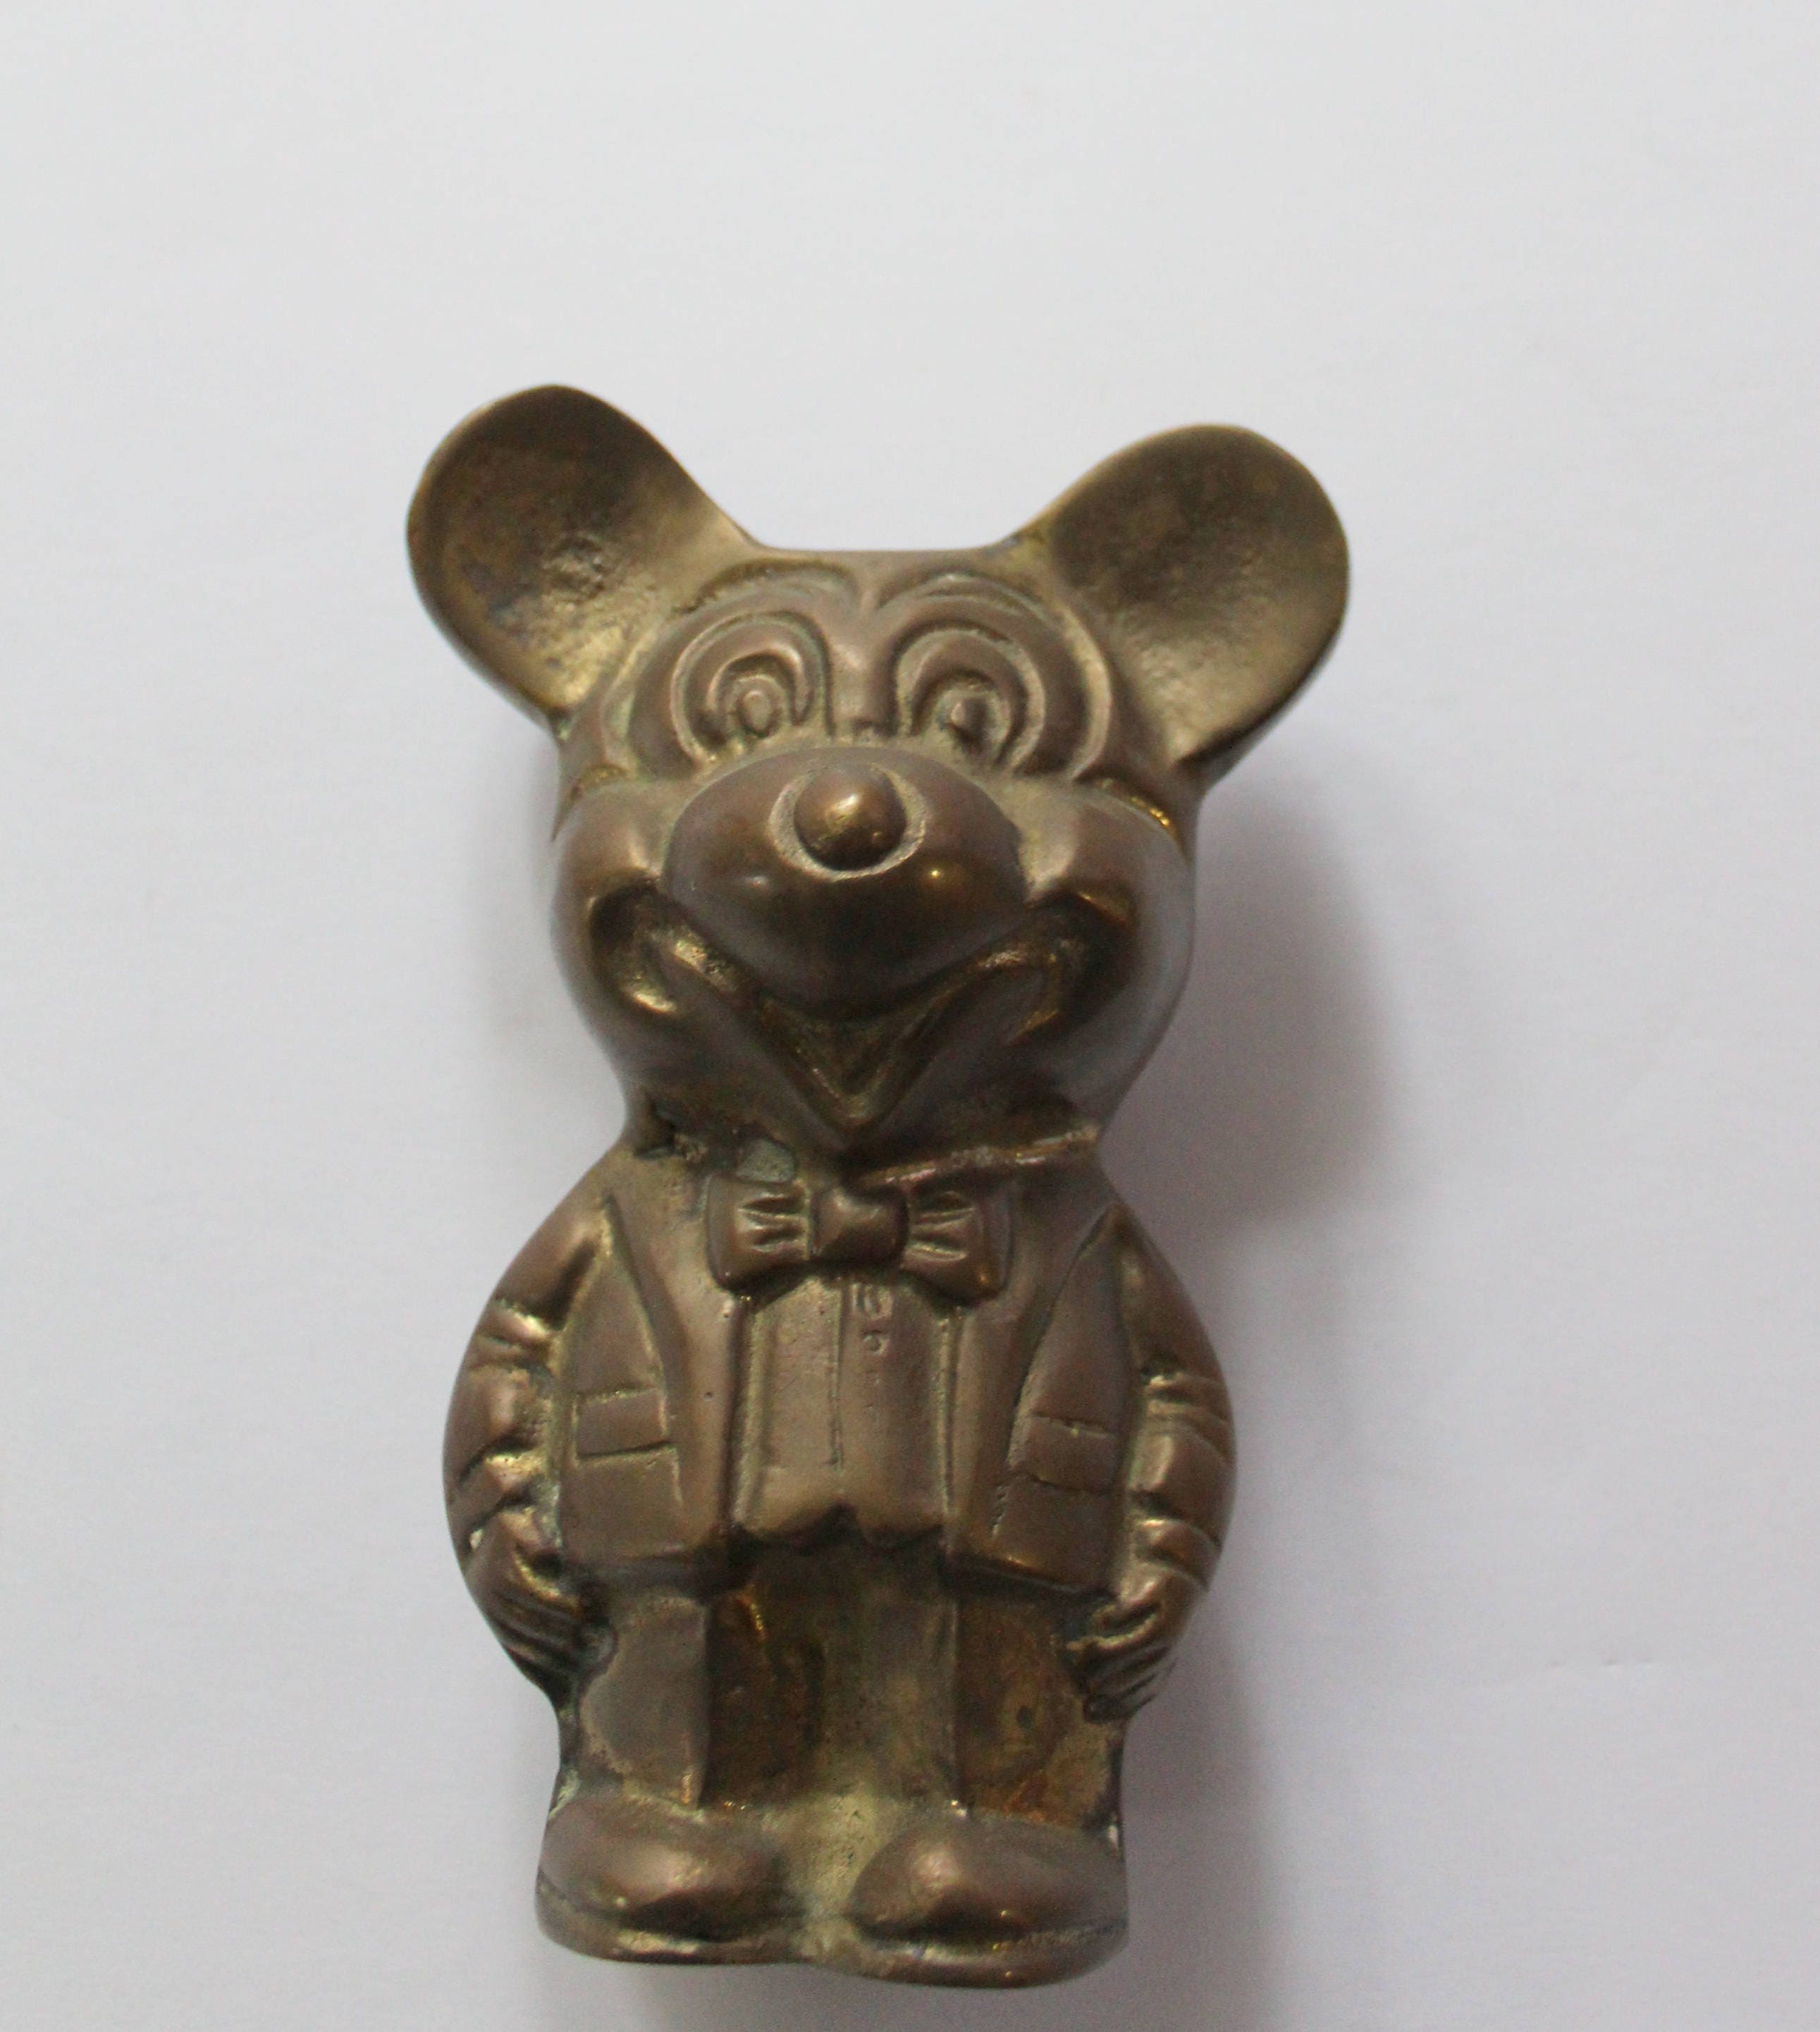 Vintage Brass Mickey Mouse Statue 1970s | Etsy